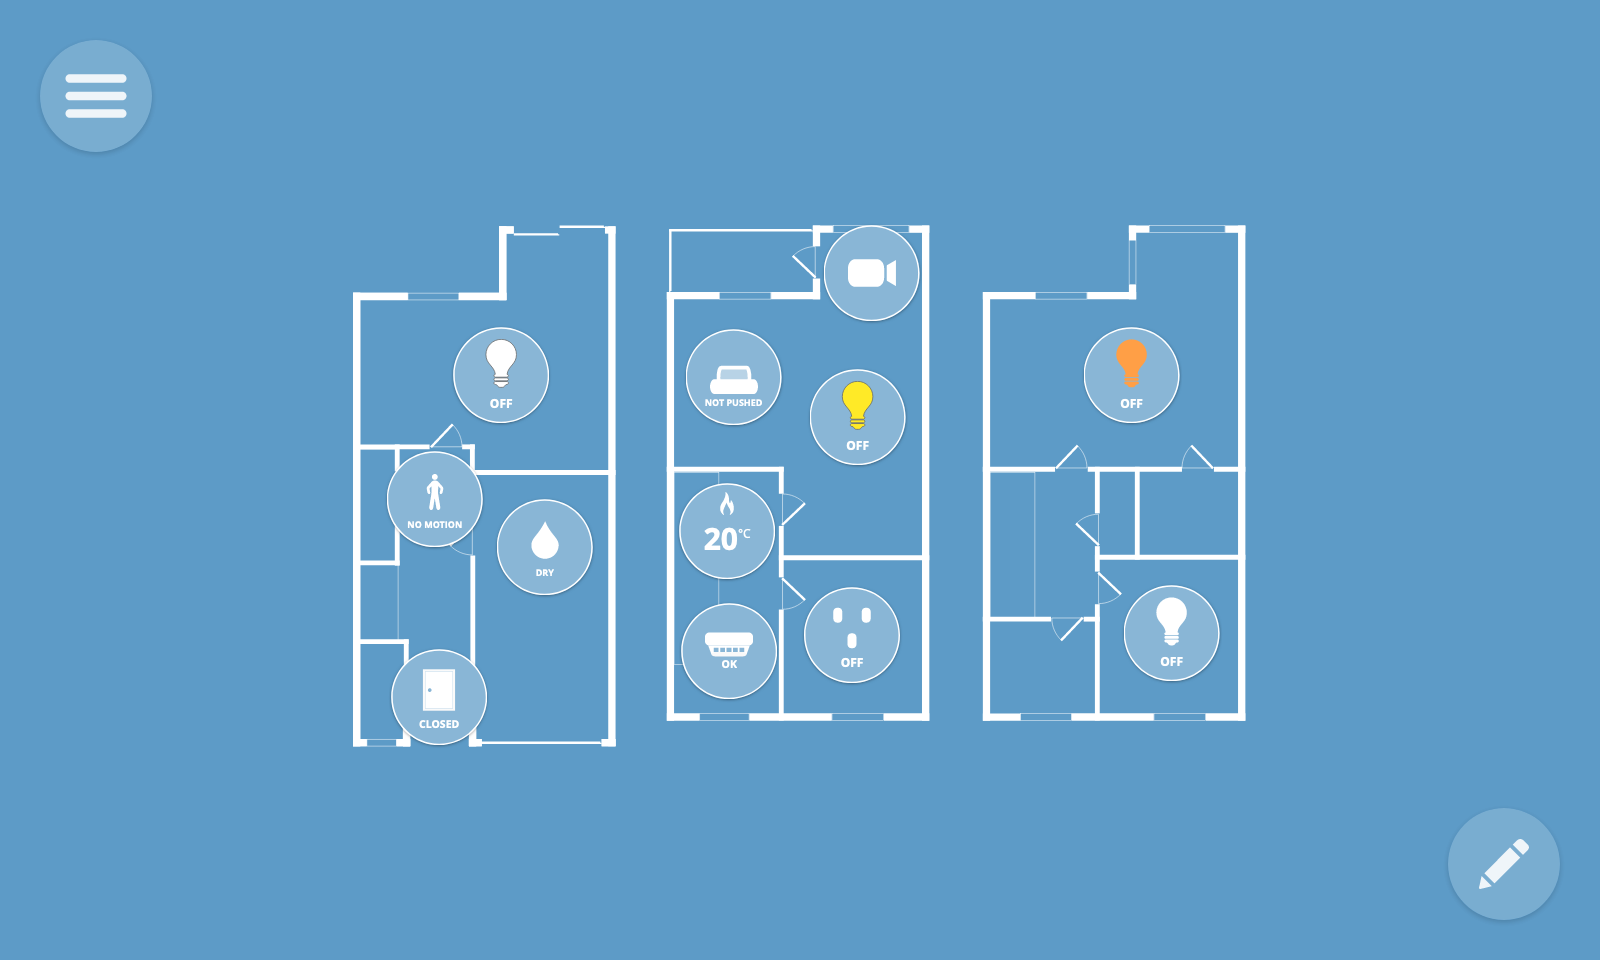 A screenshot with icons representing devices on a floorplan of a house